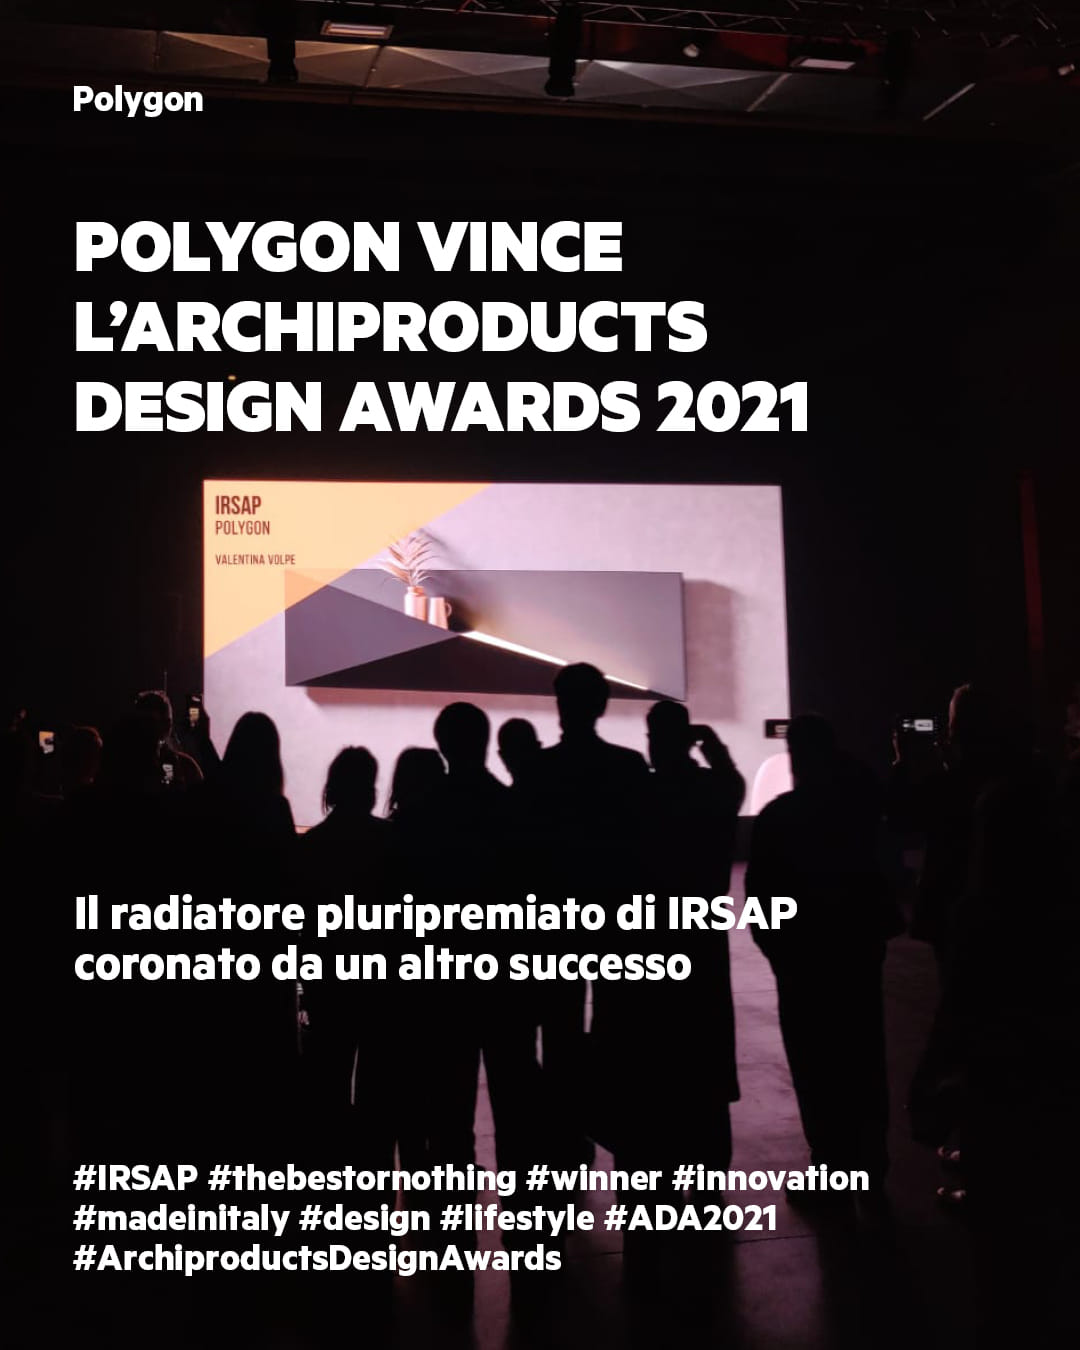 Polygon remporte l'Archiproducts Design Awards 2021